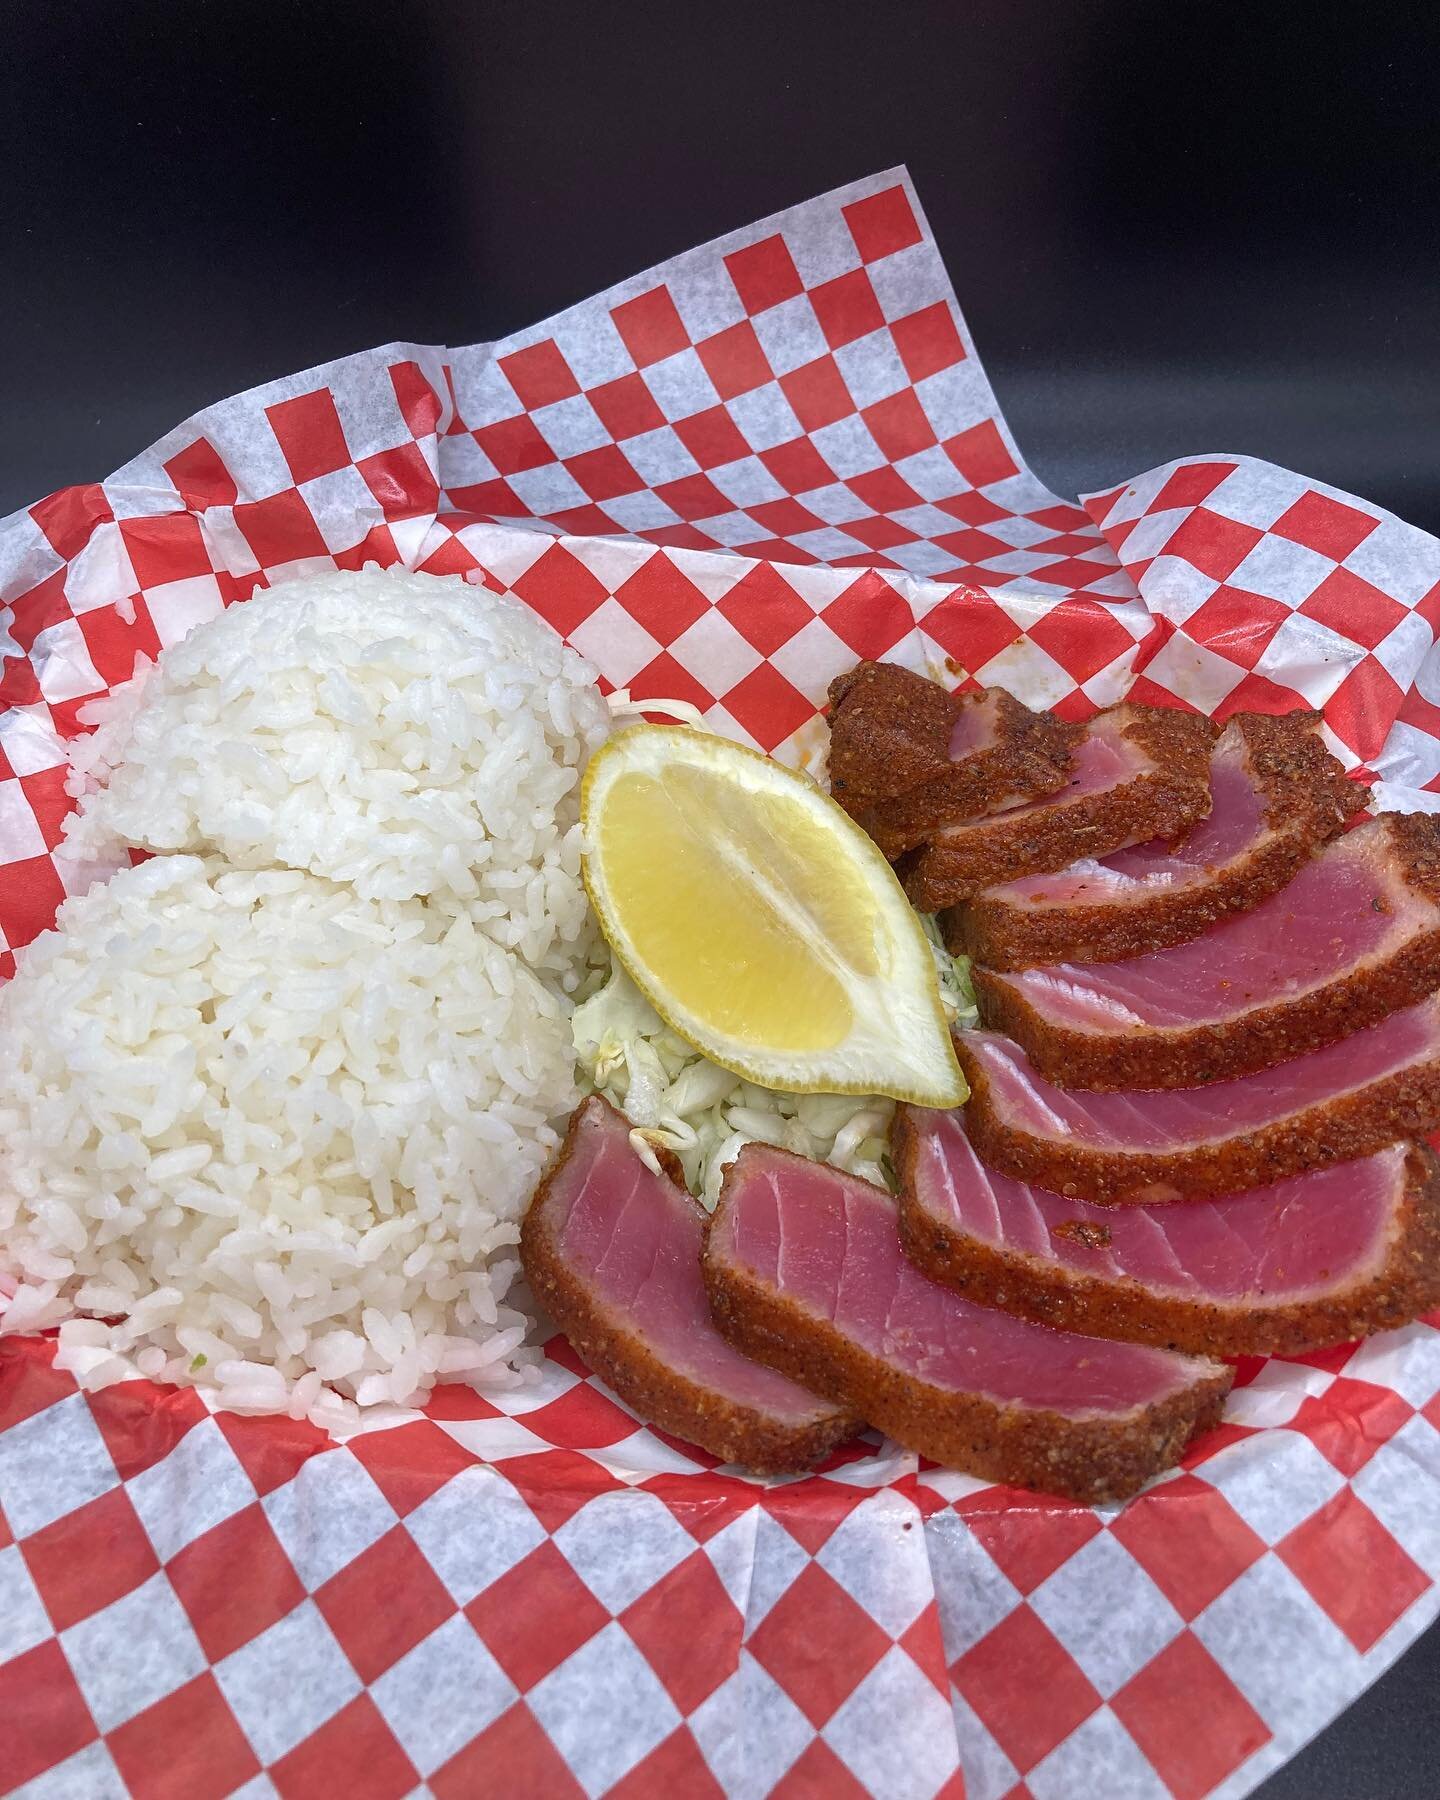 Come try our delicious seared Ahi. It comes with your choice of fries or rice. Also comes with our house made wasabi ranch. So good! 

#mauifishnchips #hawaii #maui #kihei #fish #food #sogood #ahi #comeback #beach #ocean #sunset #onogrinds